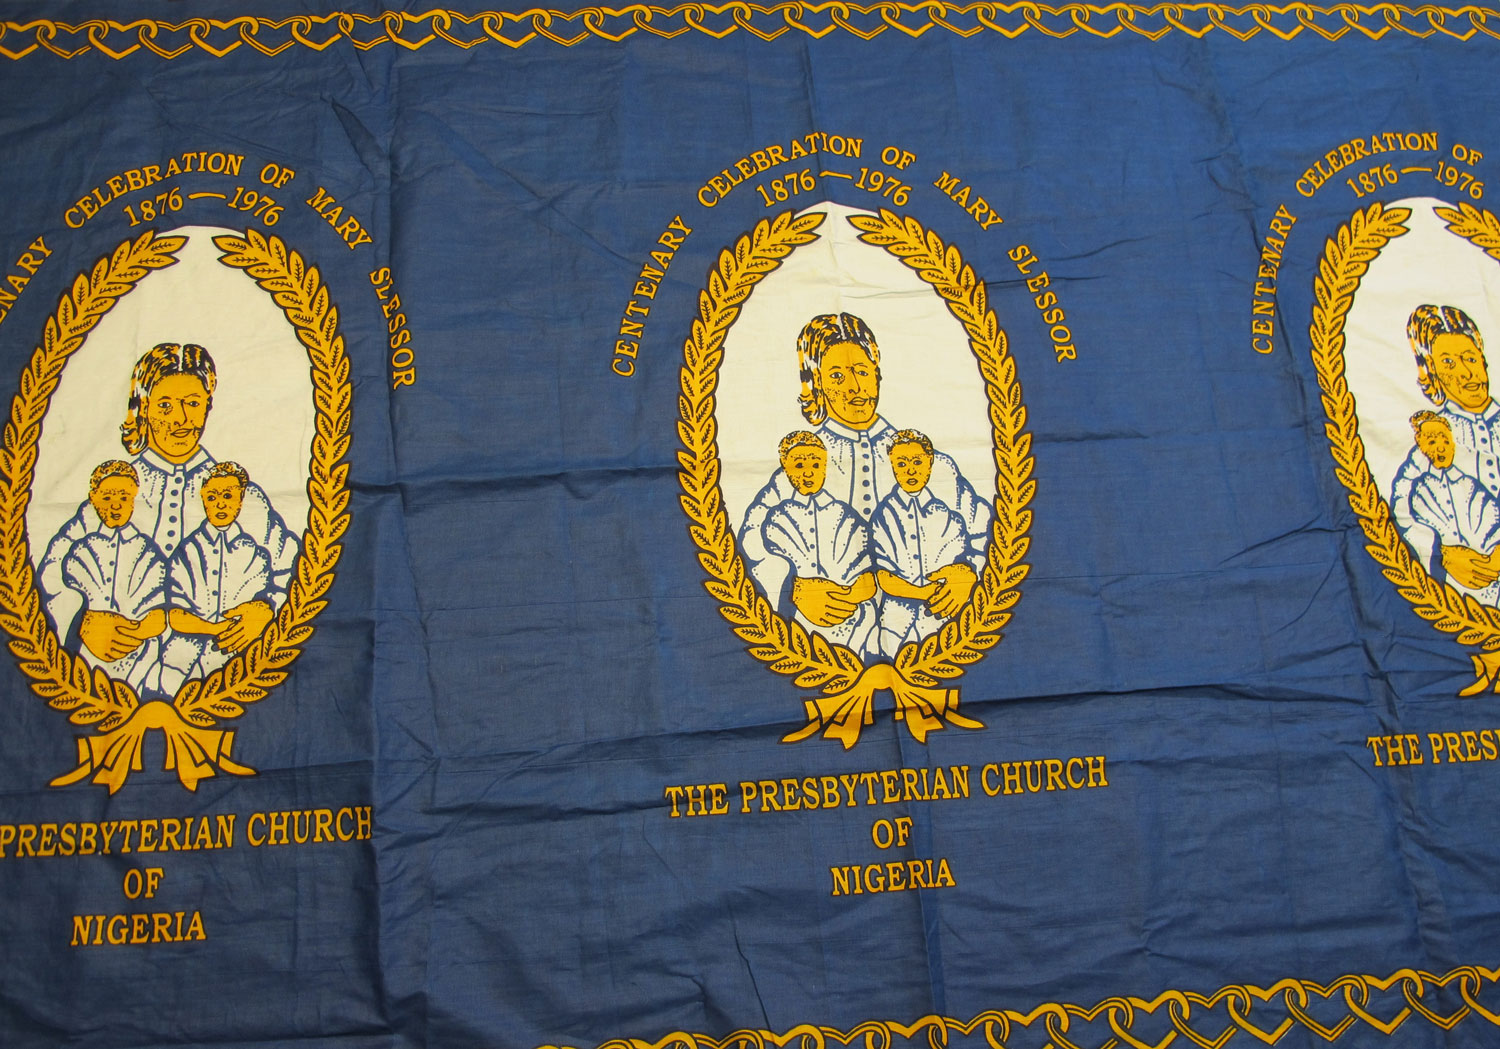 Cotton cloth commissioned by the Presbyterian Church of Nigeria to commemorate the centenary of the arrival of Scottish missionary Mary Slessor in Calabar: Africa, West Africa, Nigeria, 1976.